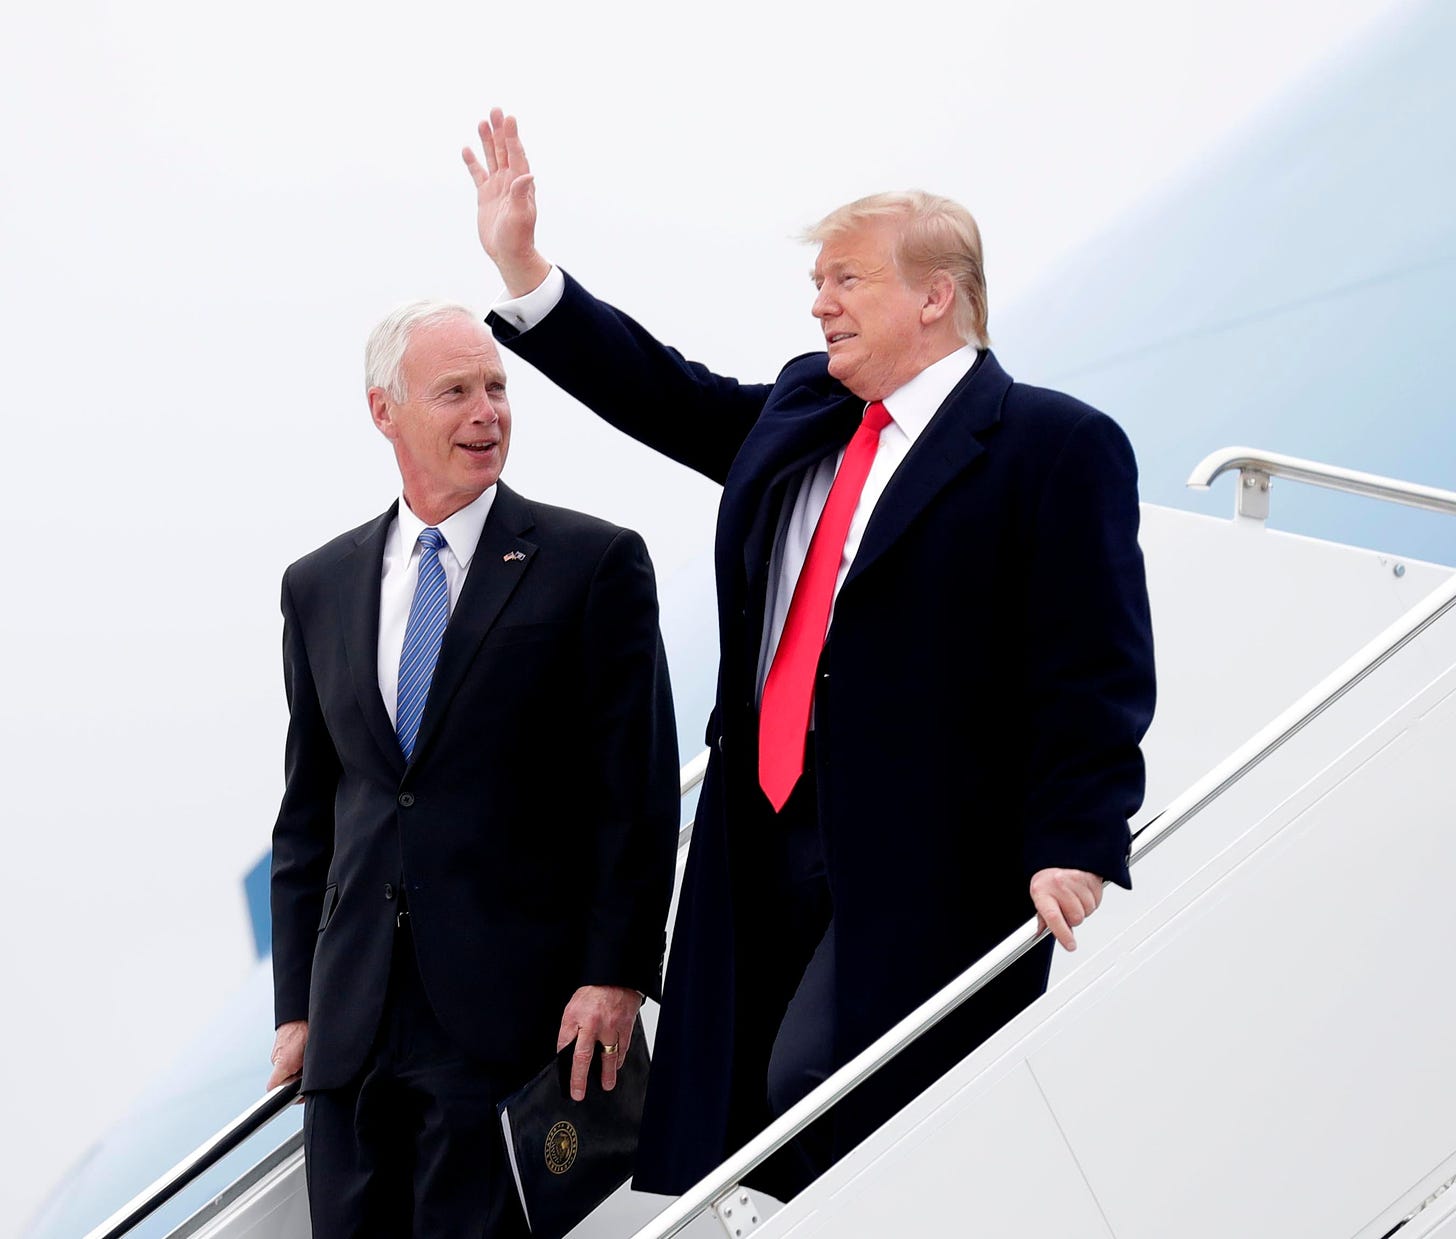 Donald Trump, impeachment and Ron Johnson: What you need to know